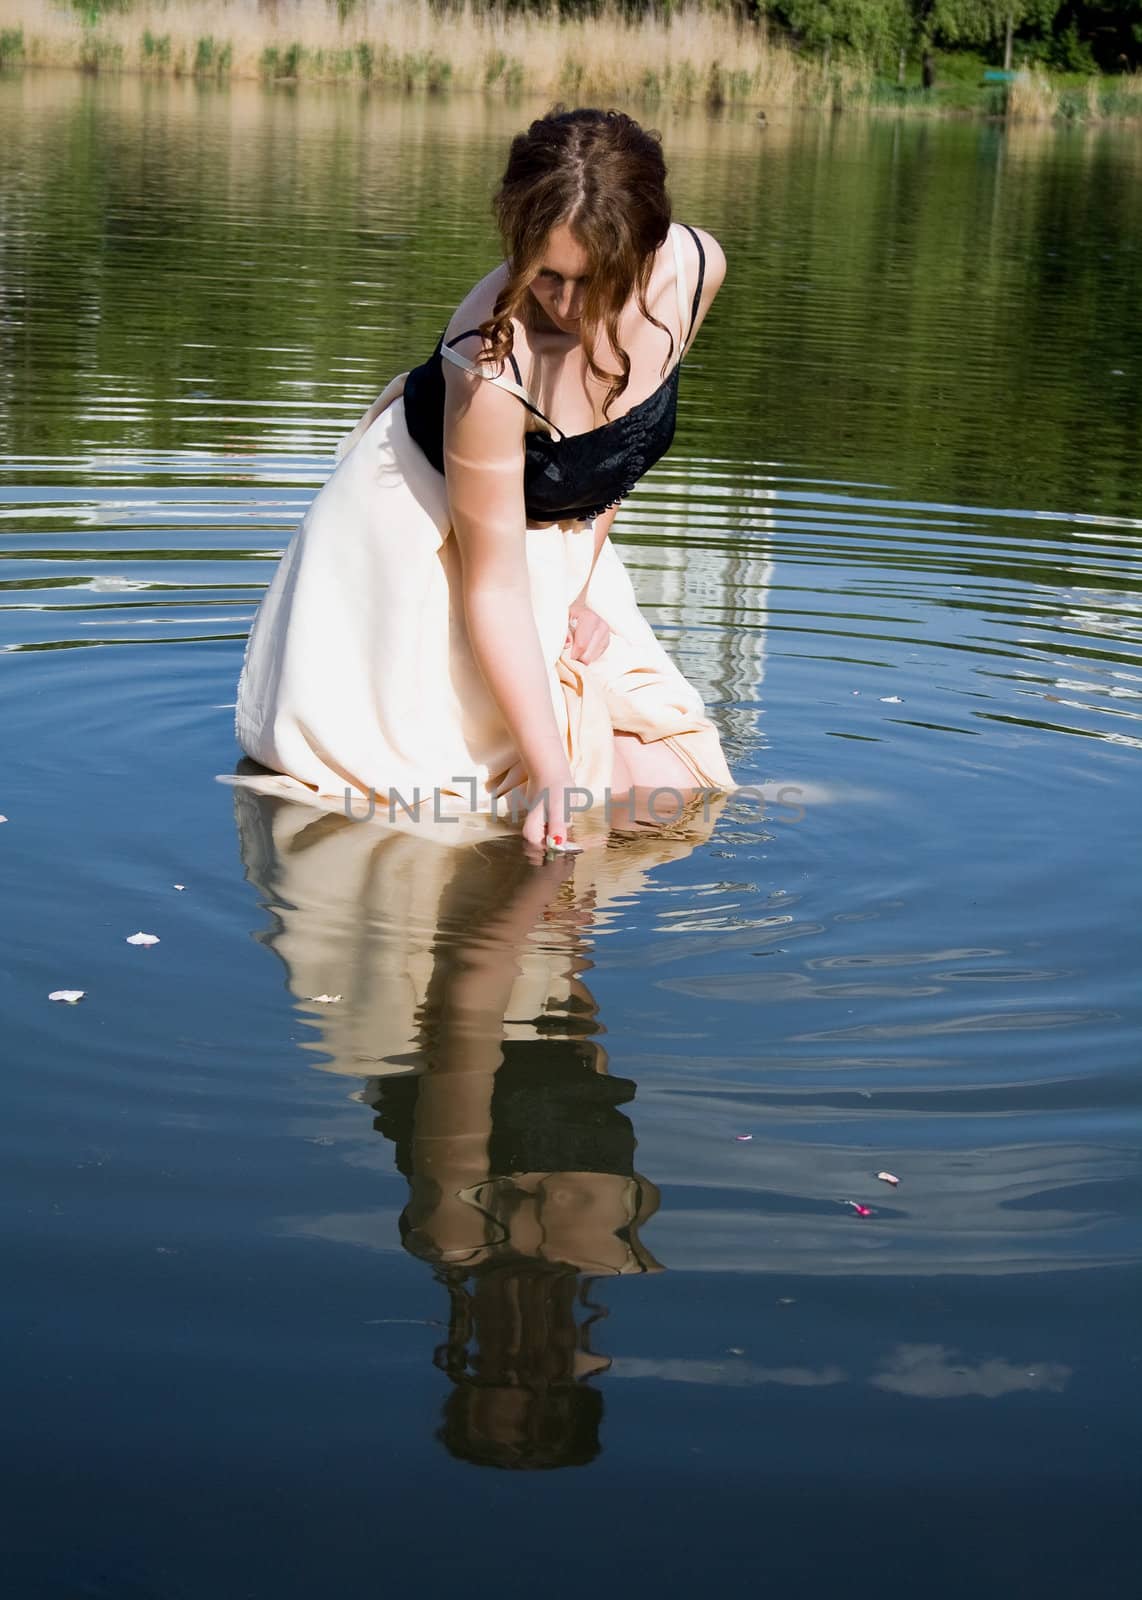 girl looks at his reflection in the water. The action takes place on the lake